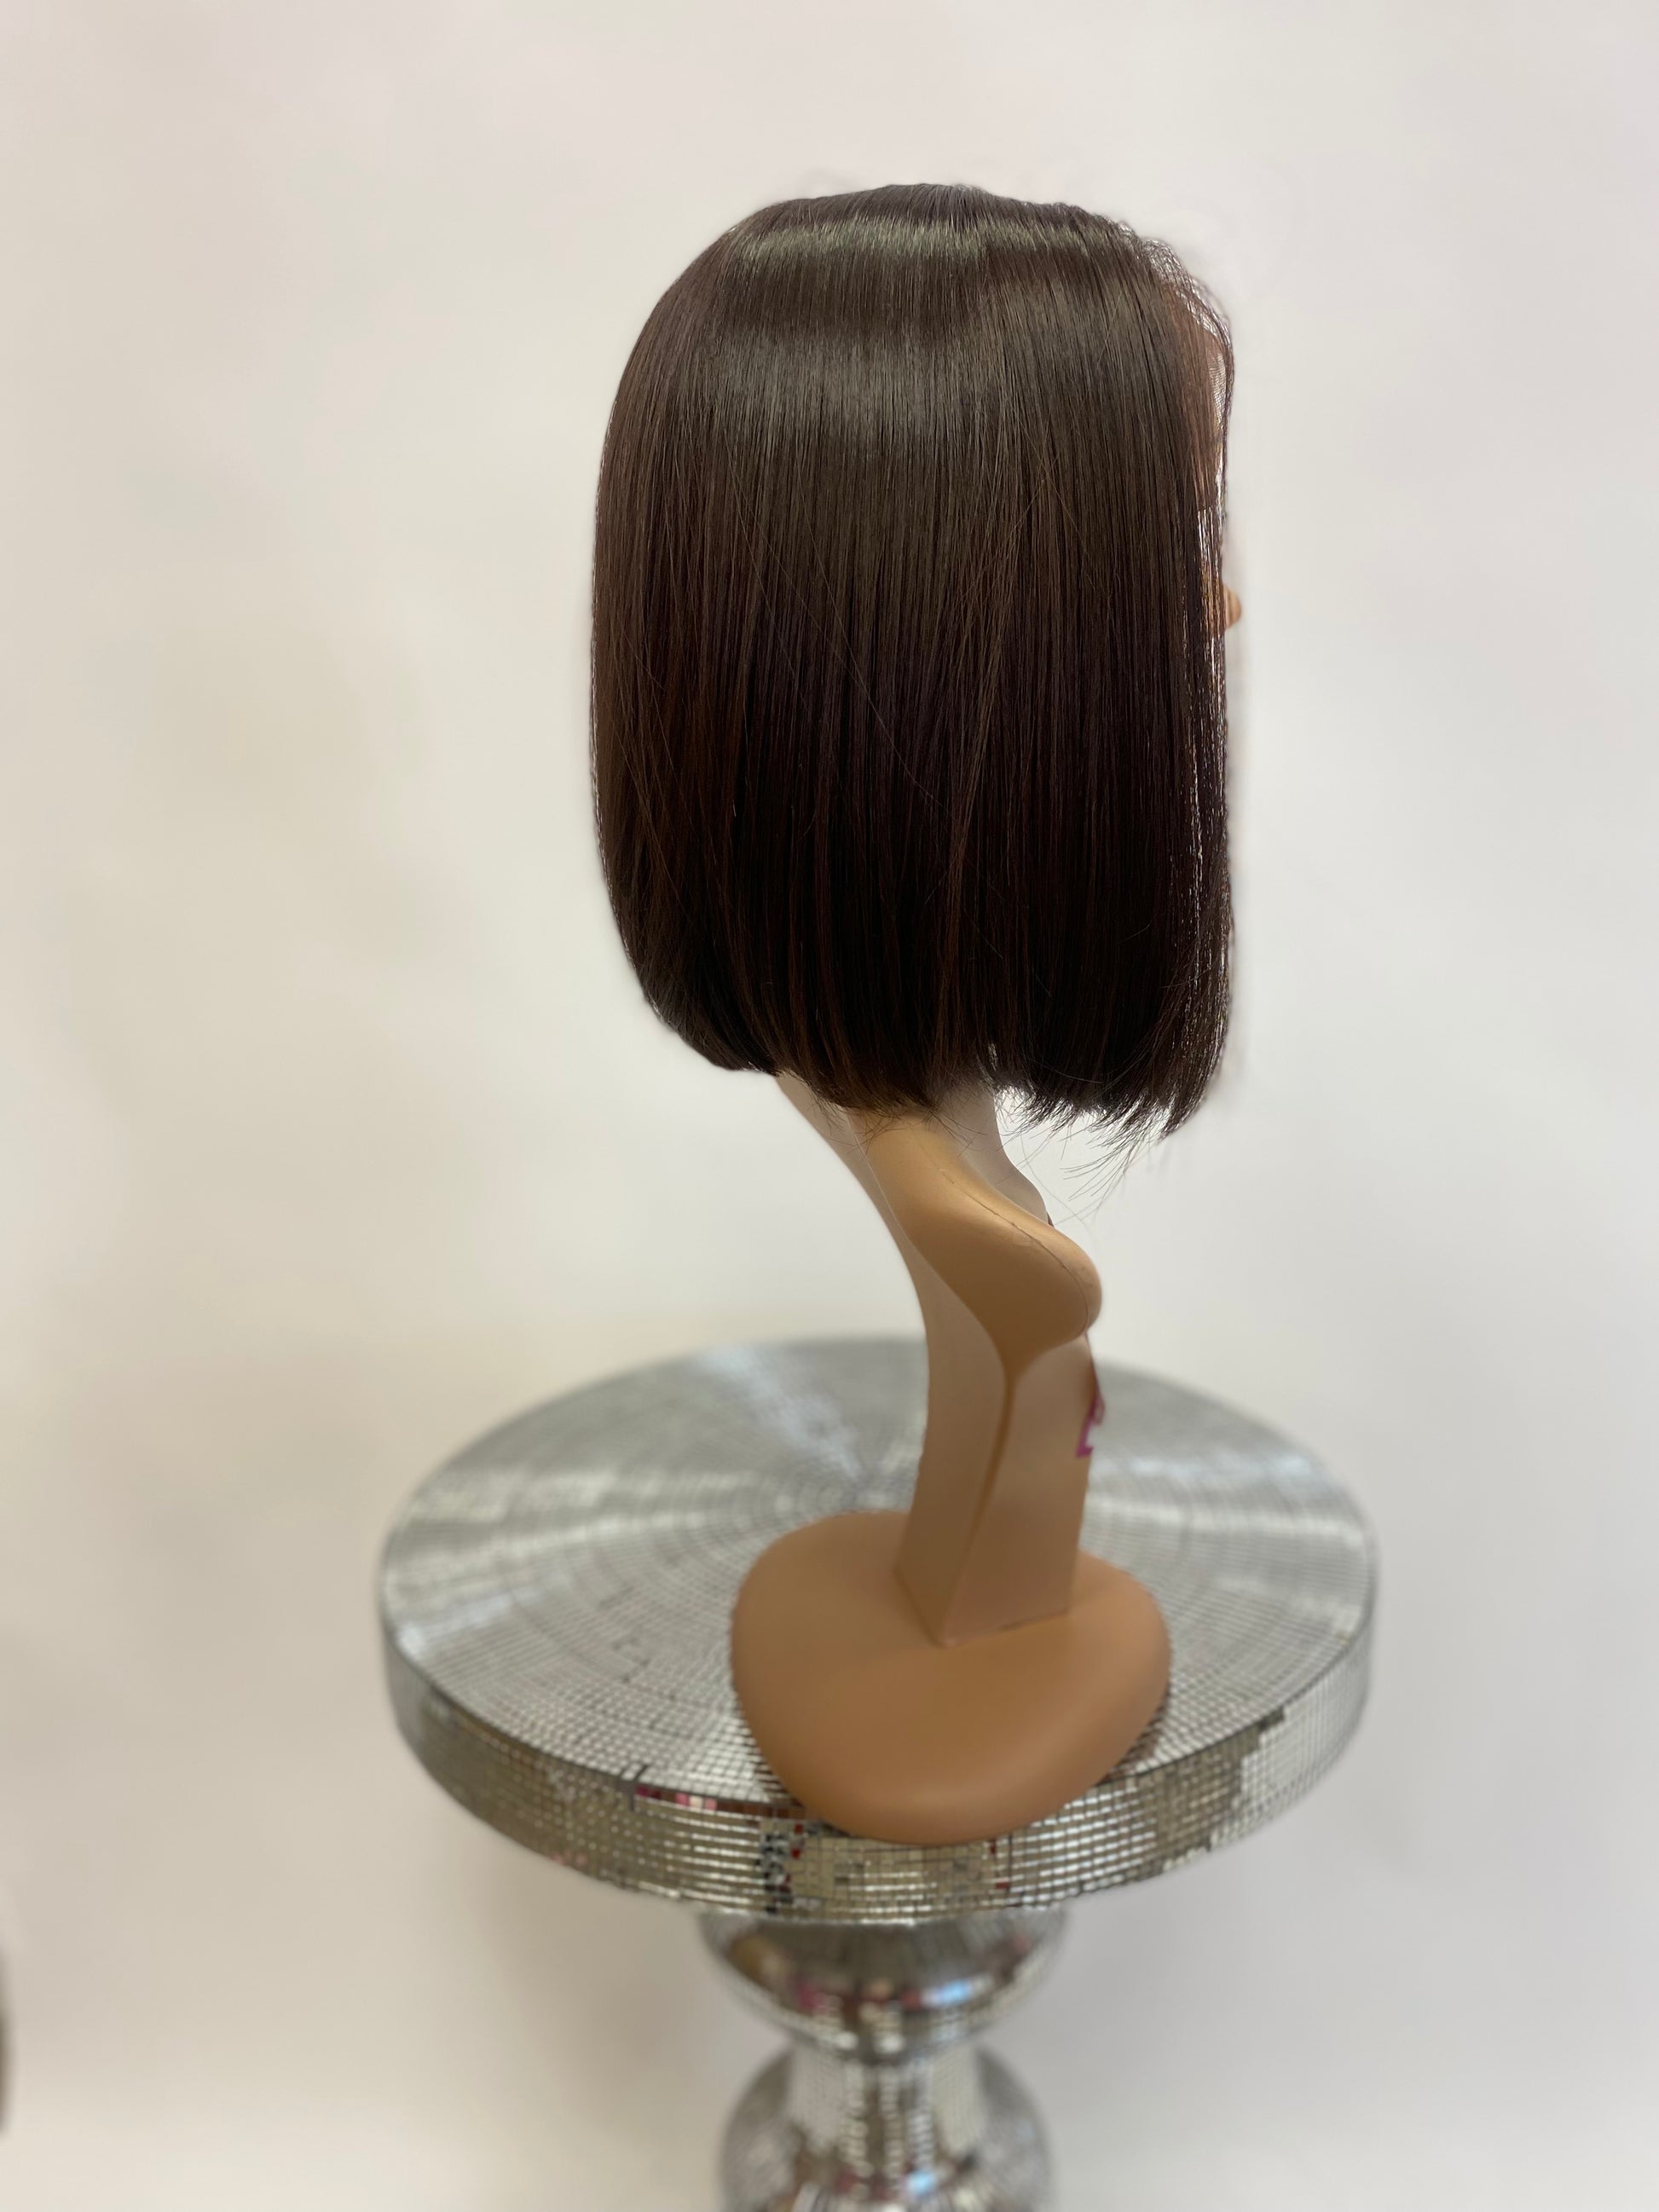 Tracy - 13x7 Free Part Lace Front Wig - 4 - DaizyKat Cosmetics Tracy - 13x7 Free Part Lace Front Wig - 4 DaizyKat Cosmetics Wigs